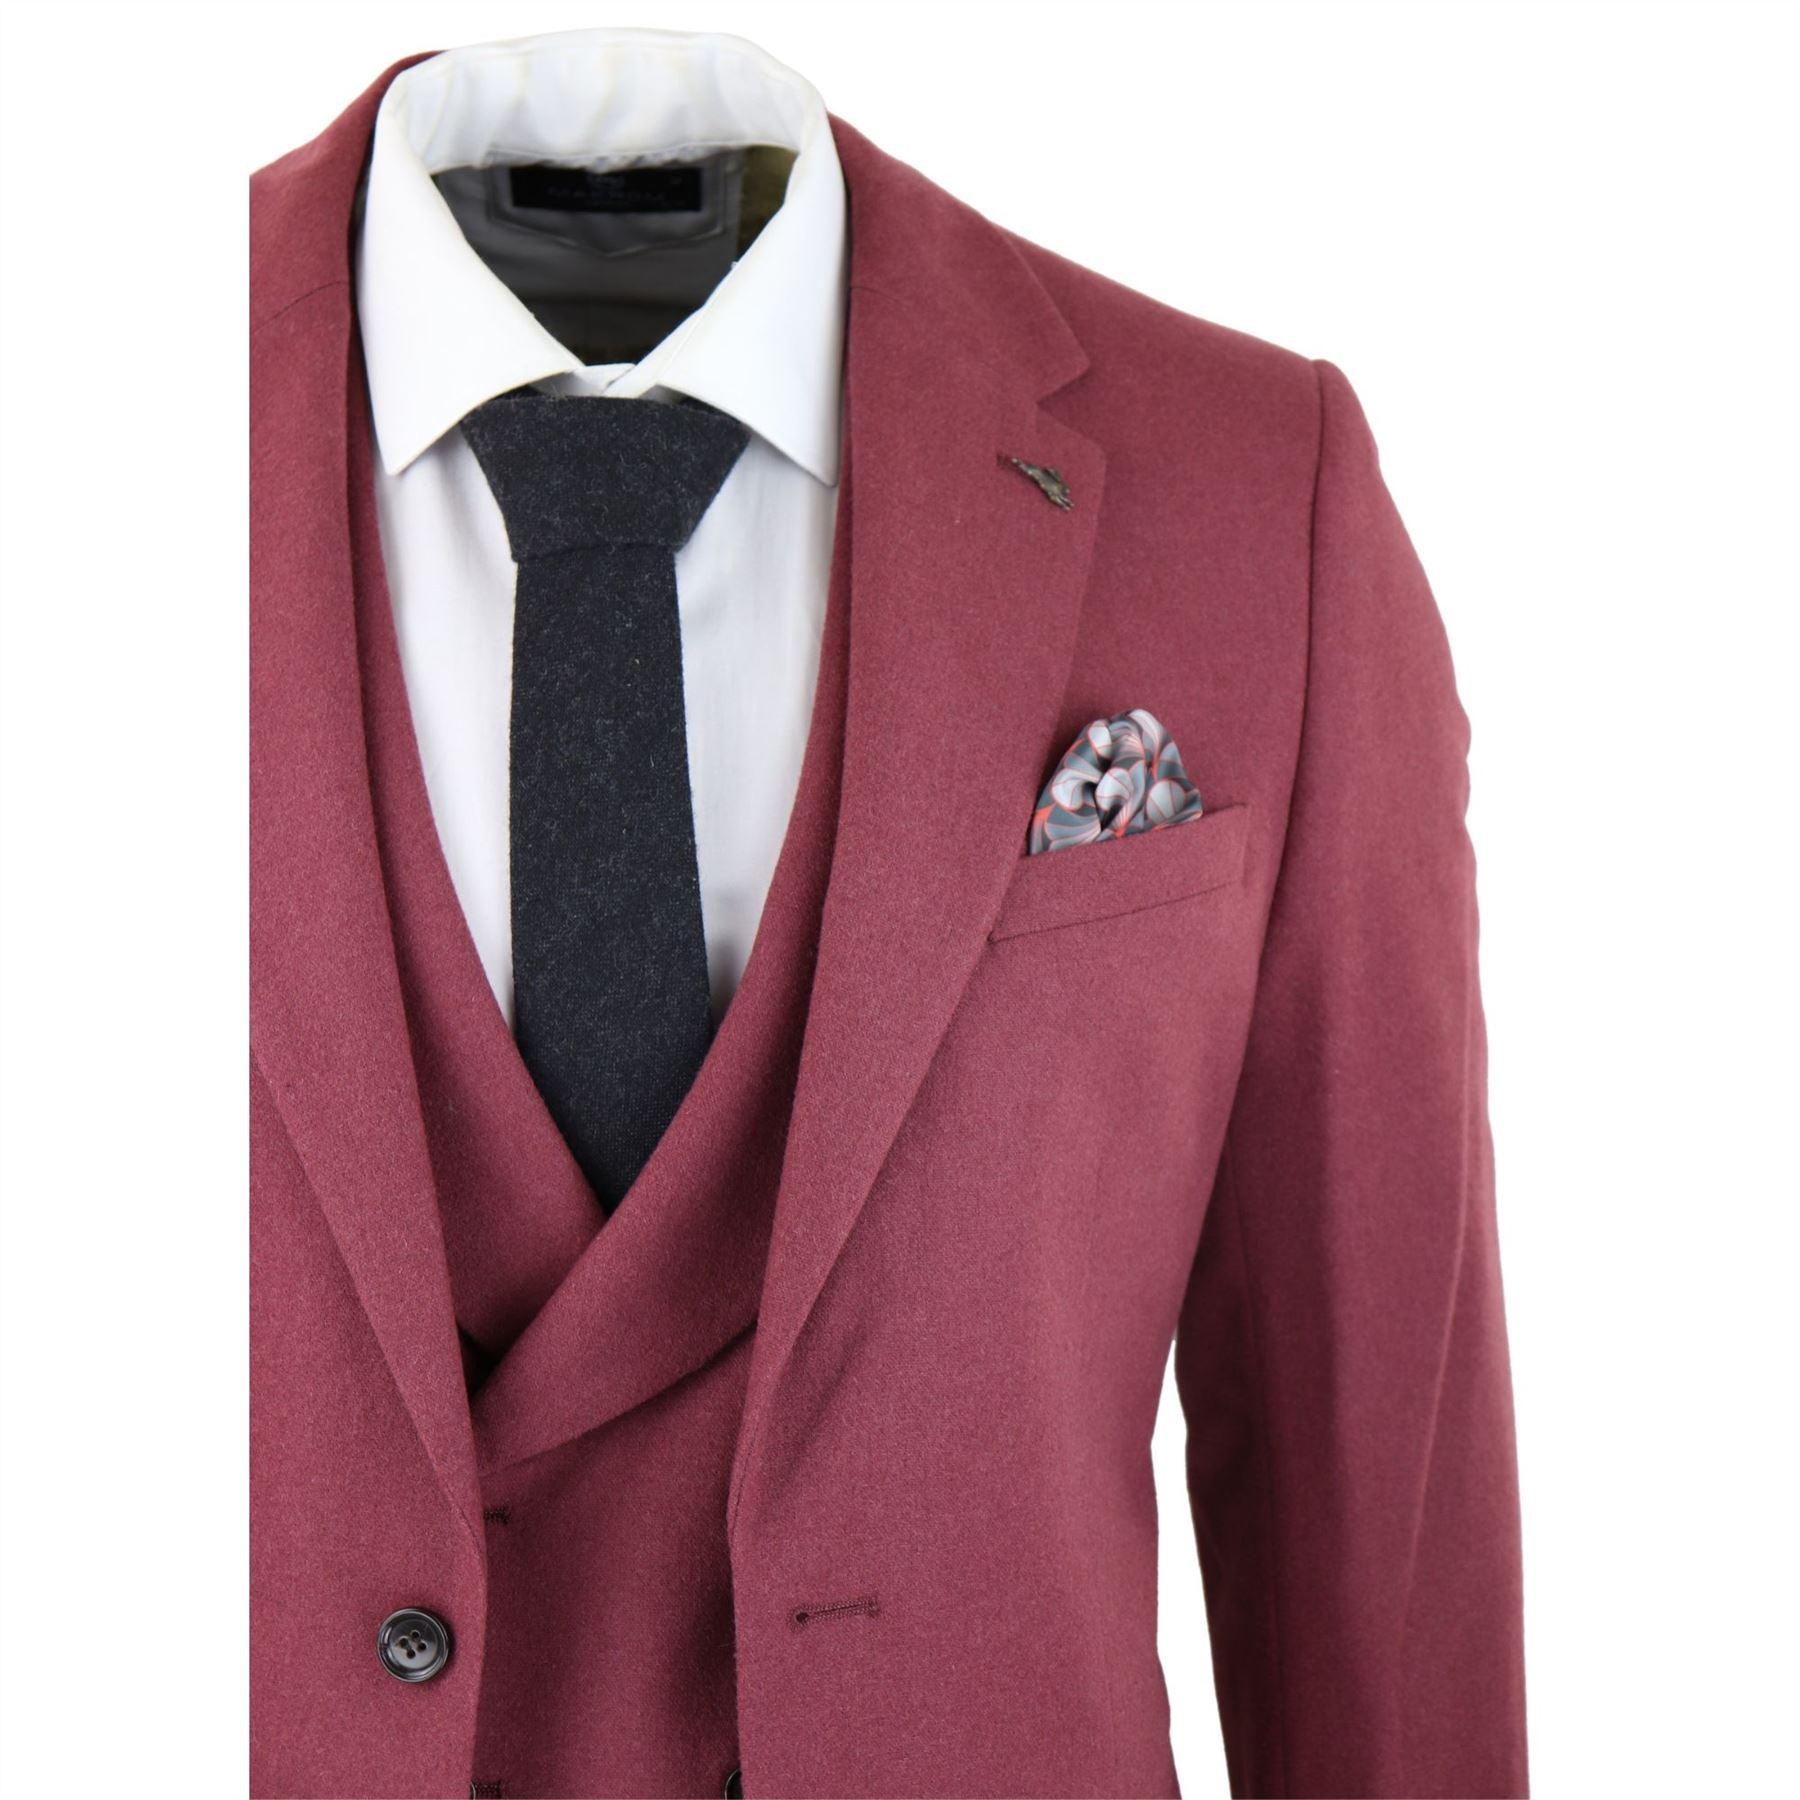 Mens Wool 3 Piece Burgundy Red Suit Double Breasted Wedding Party Vintage 1920s - Knighthood Store